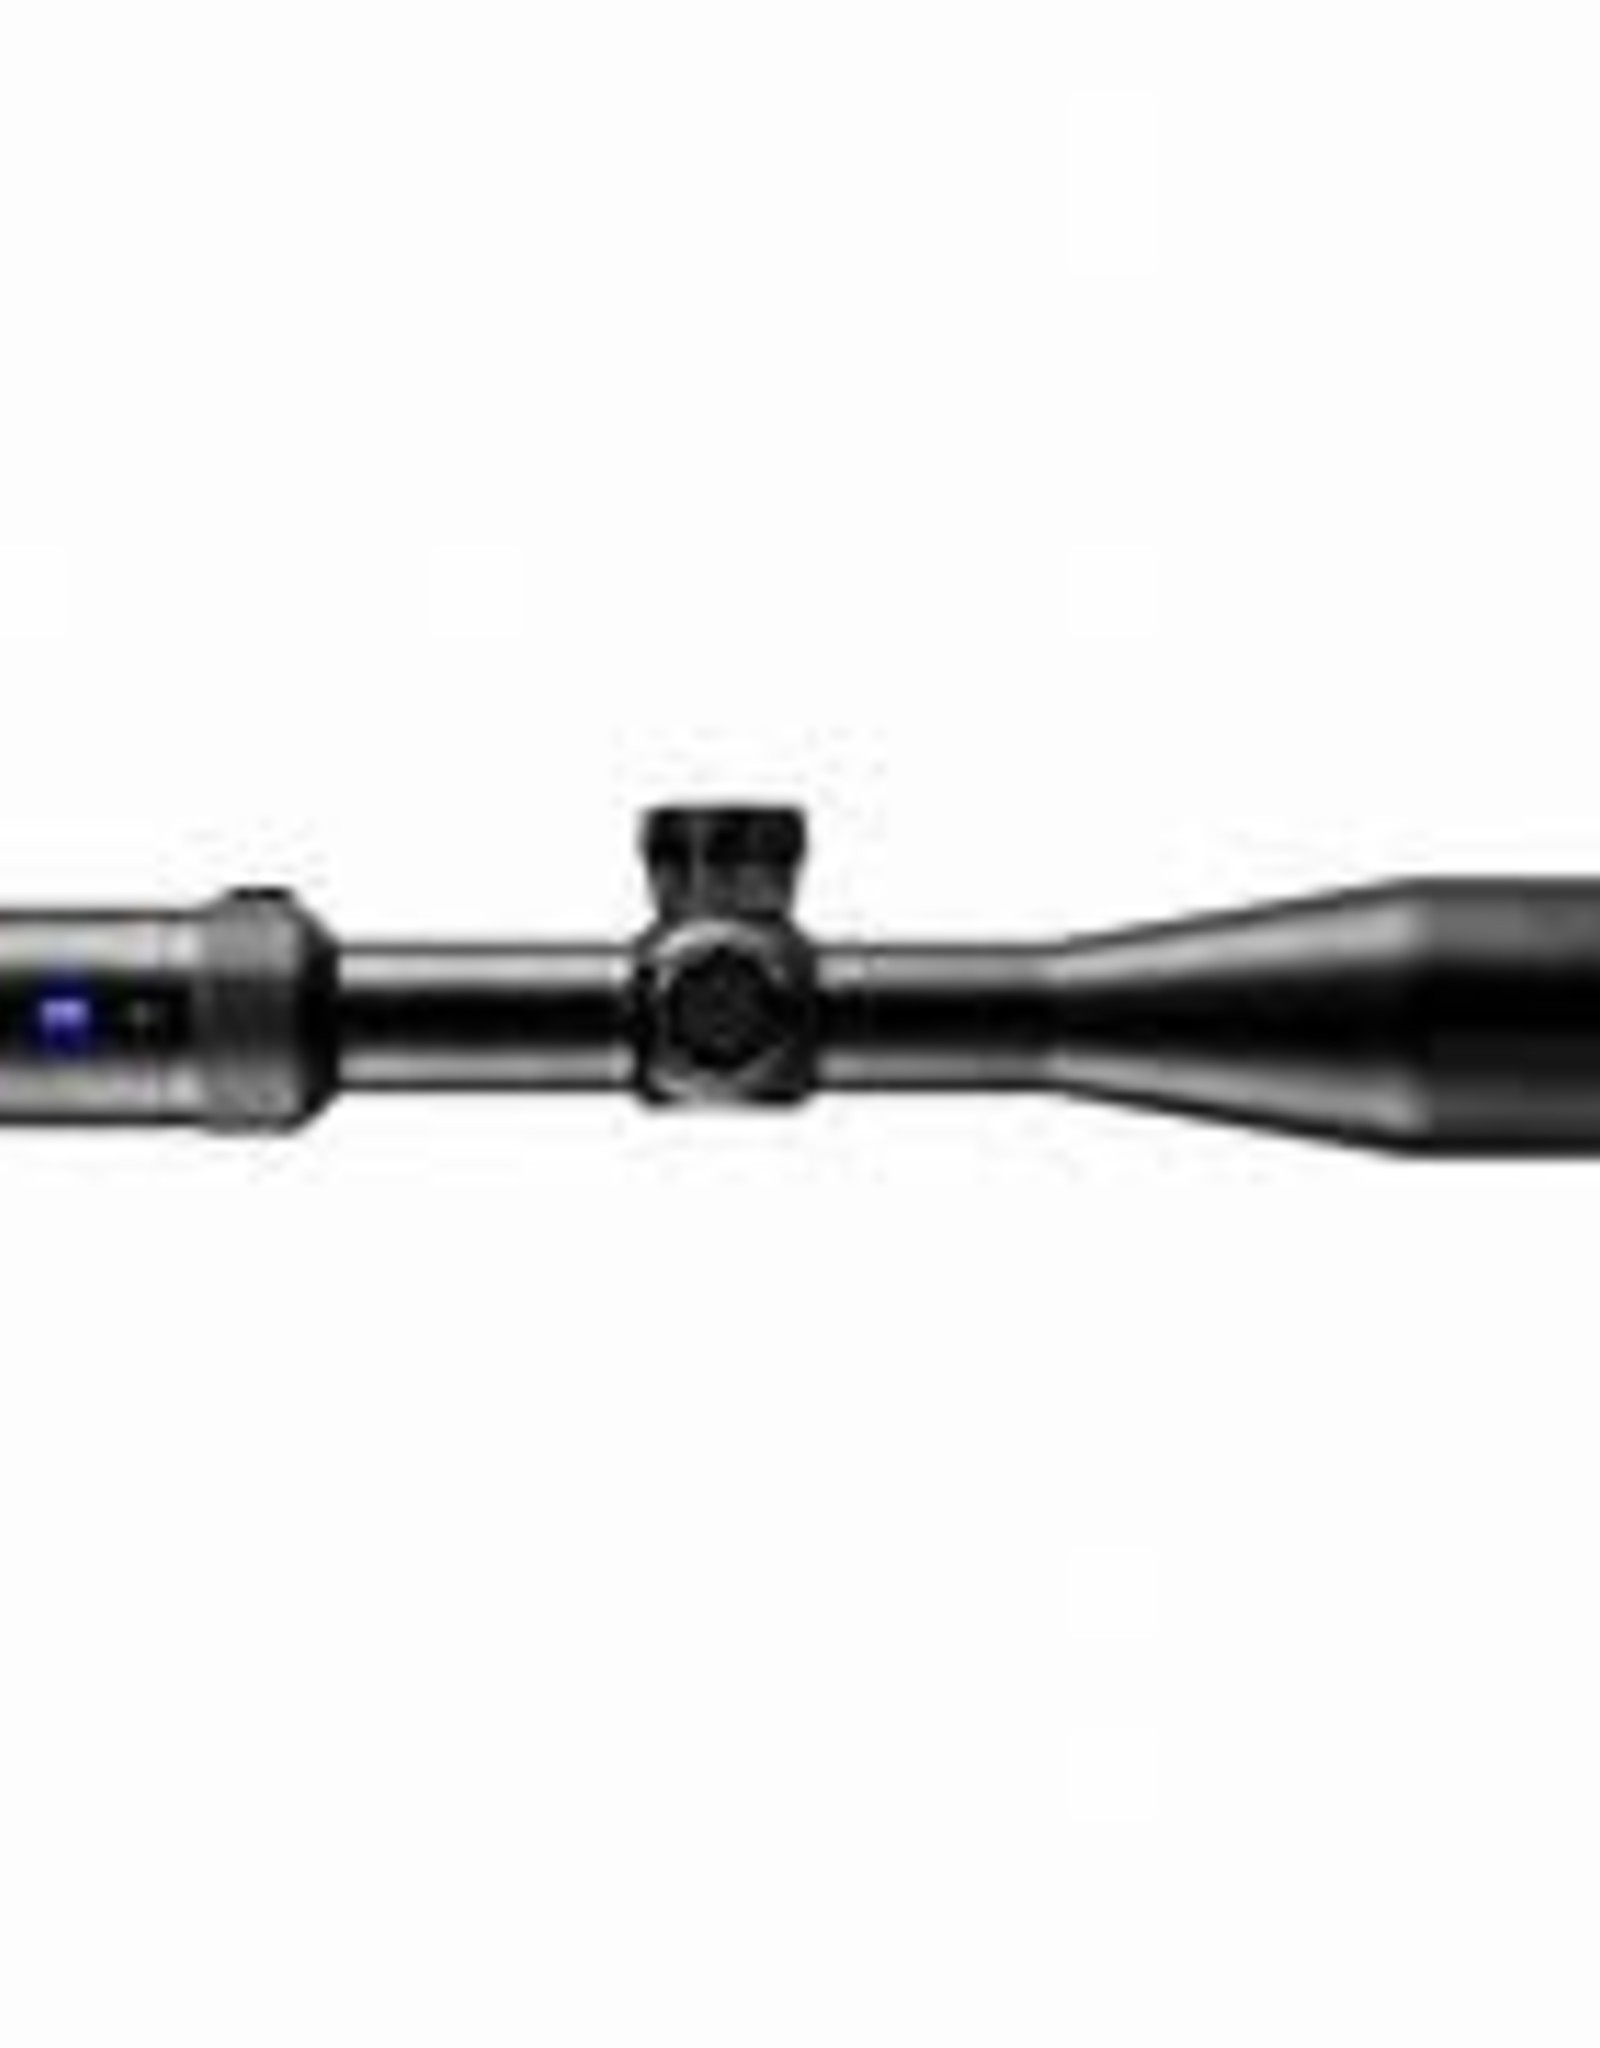 Zeiss Conquest V4 3-12x56 Reticle #20